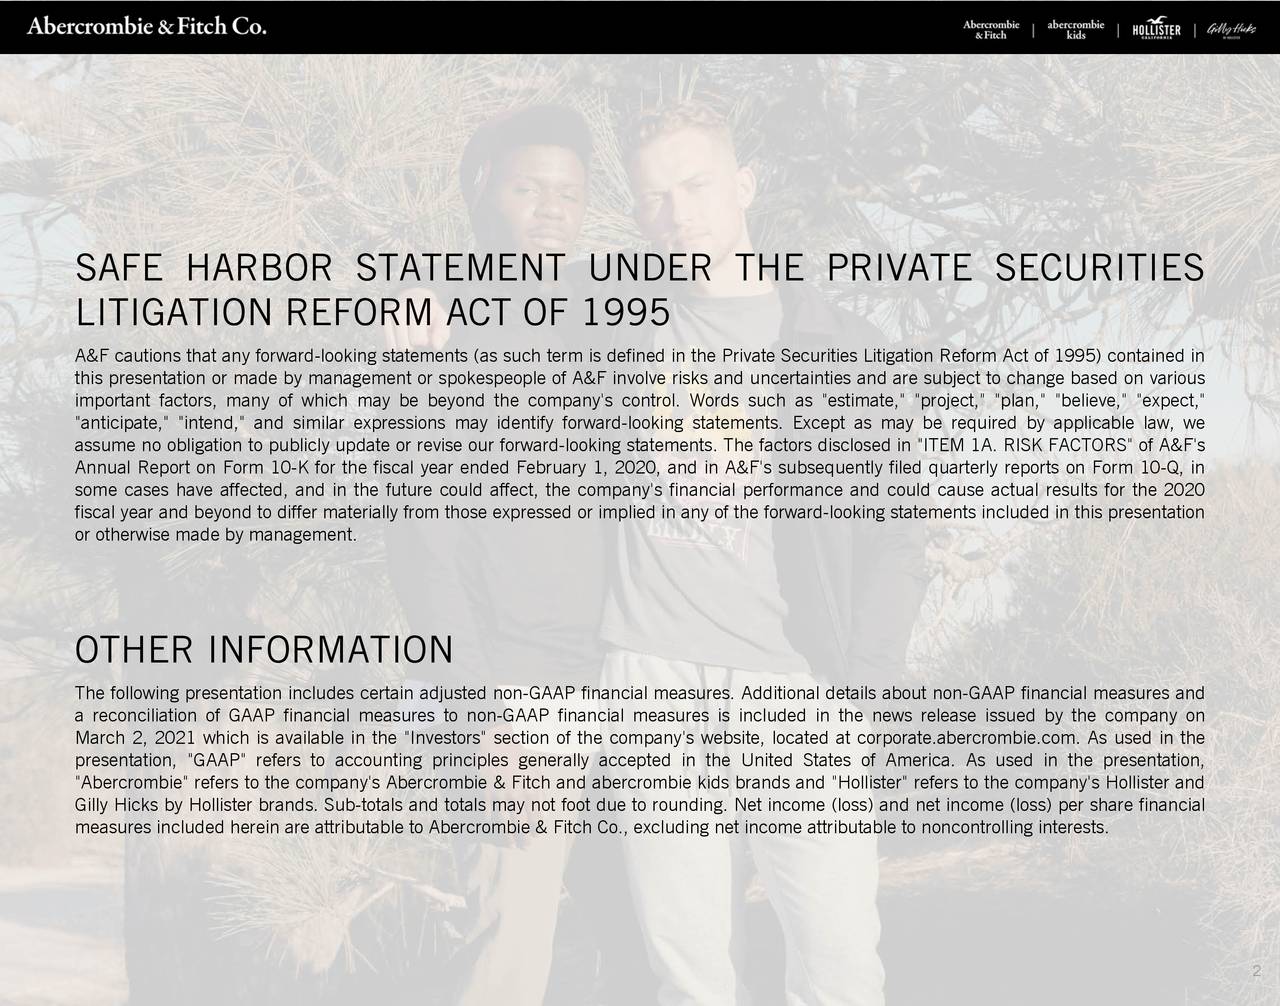 SAFE HARBOR STATEMENT UNDER THE PRIVATE SECURITIES